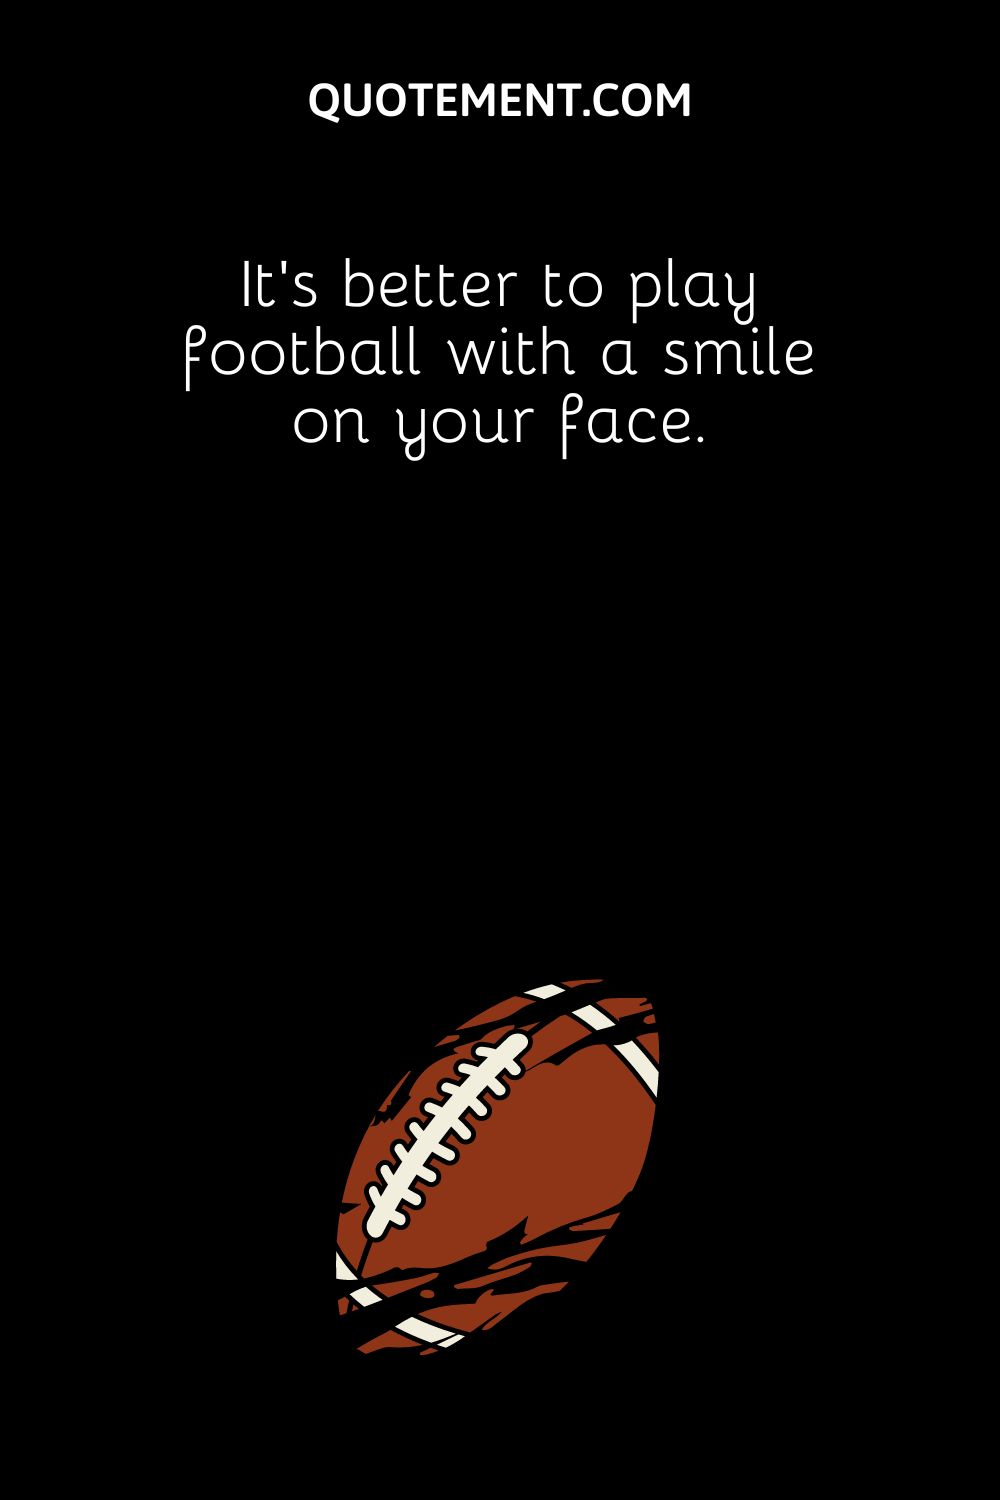 It’s better to play football with a smile on your face.